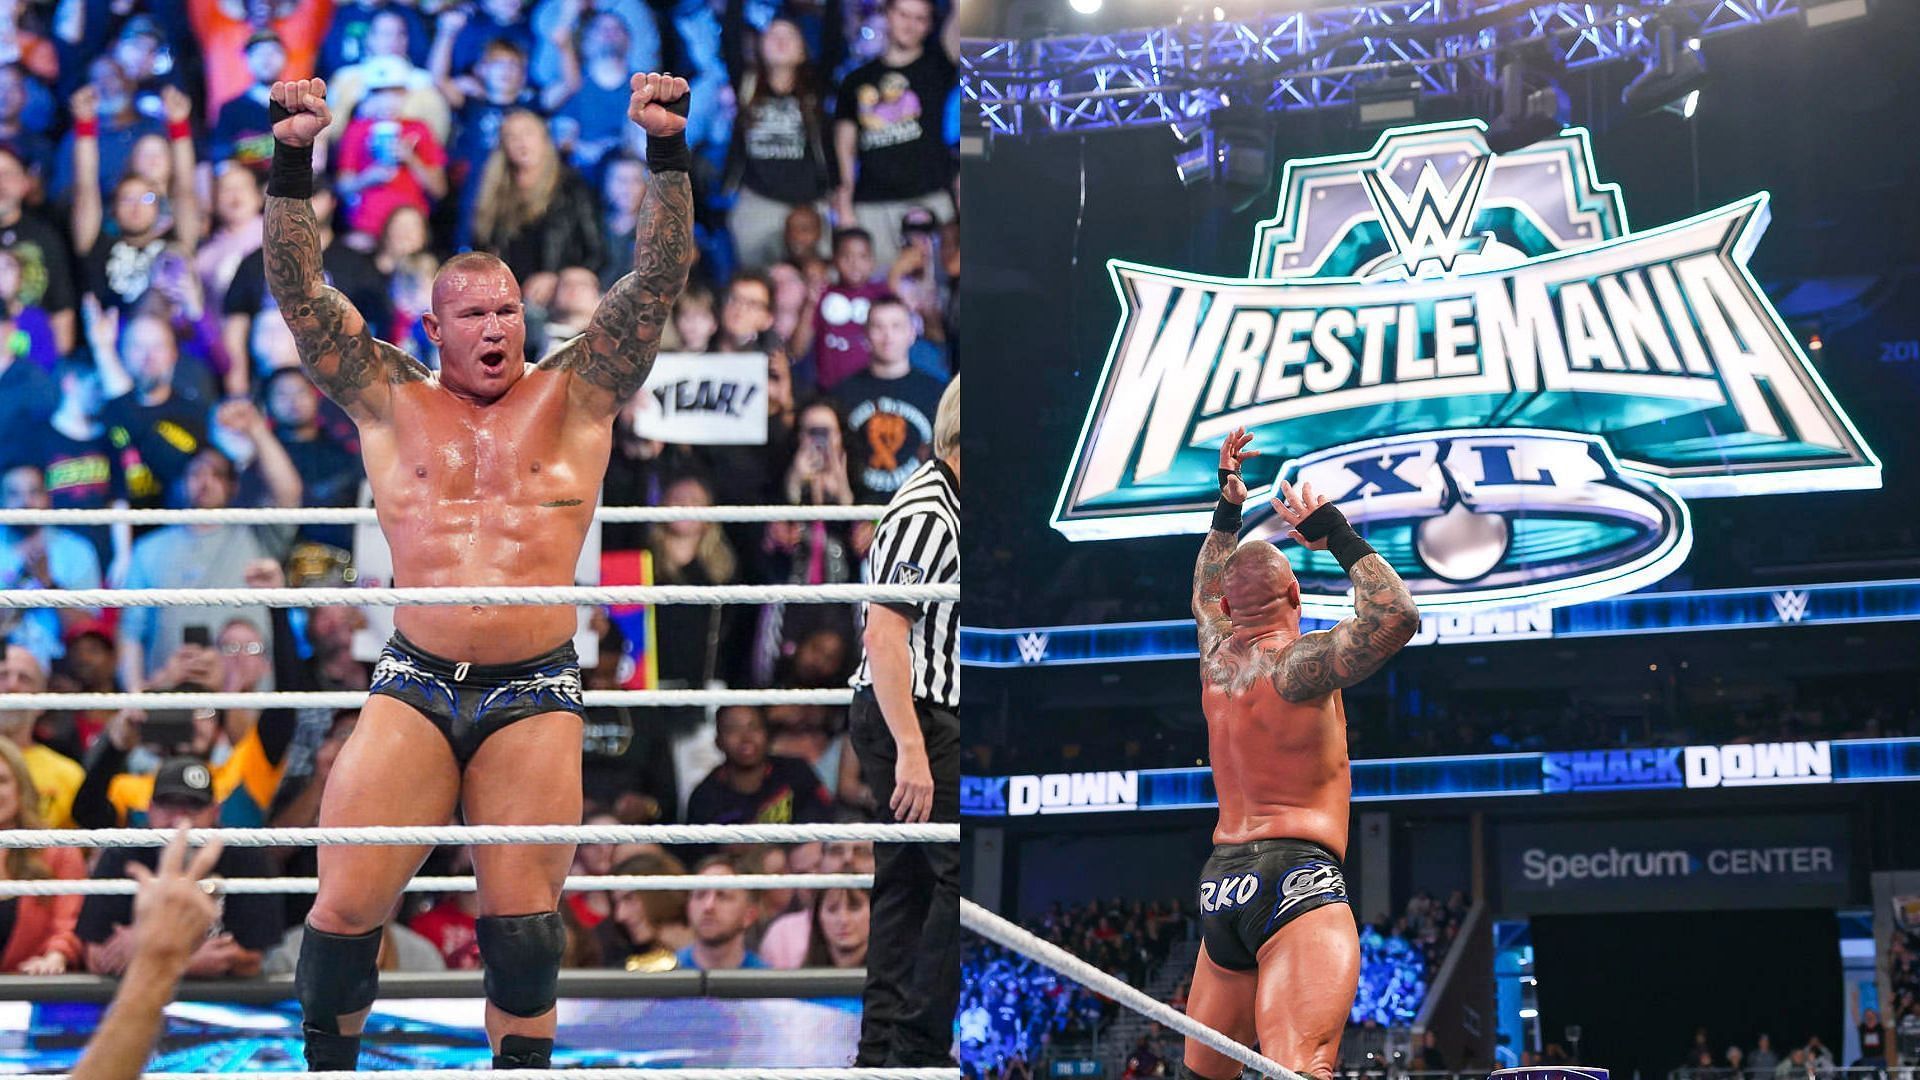 Randy Orton was in action on this week